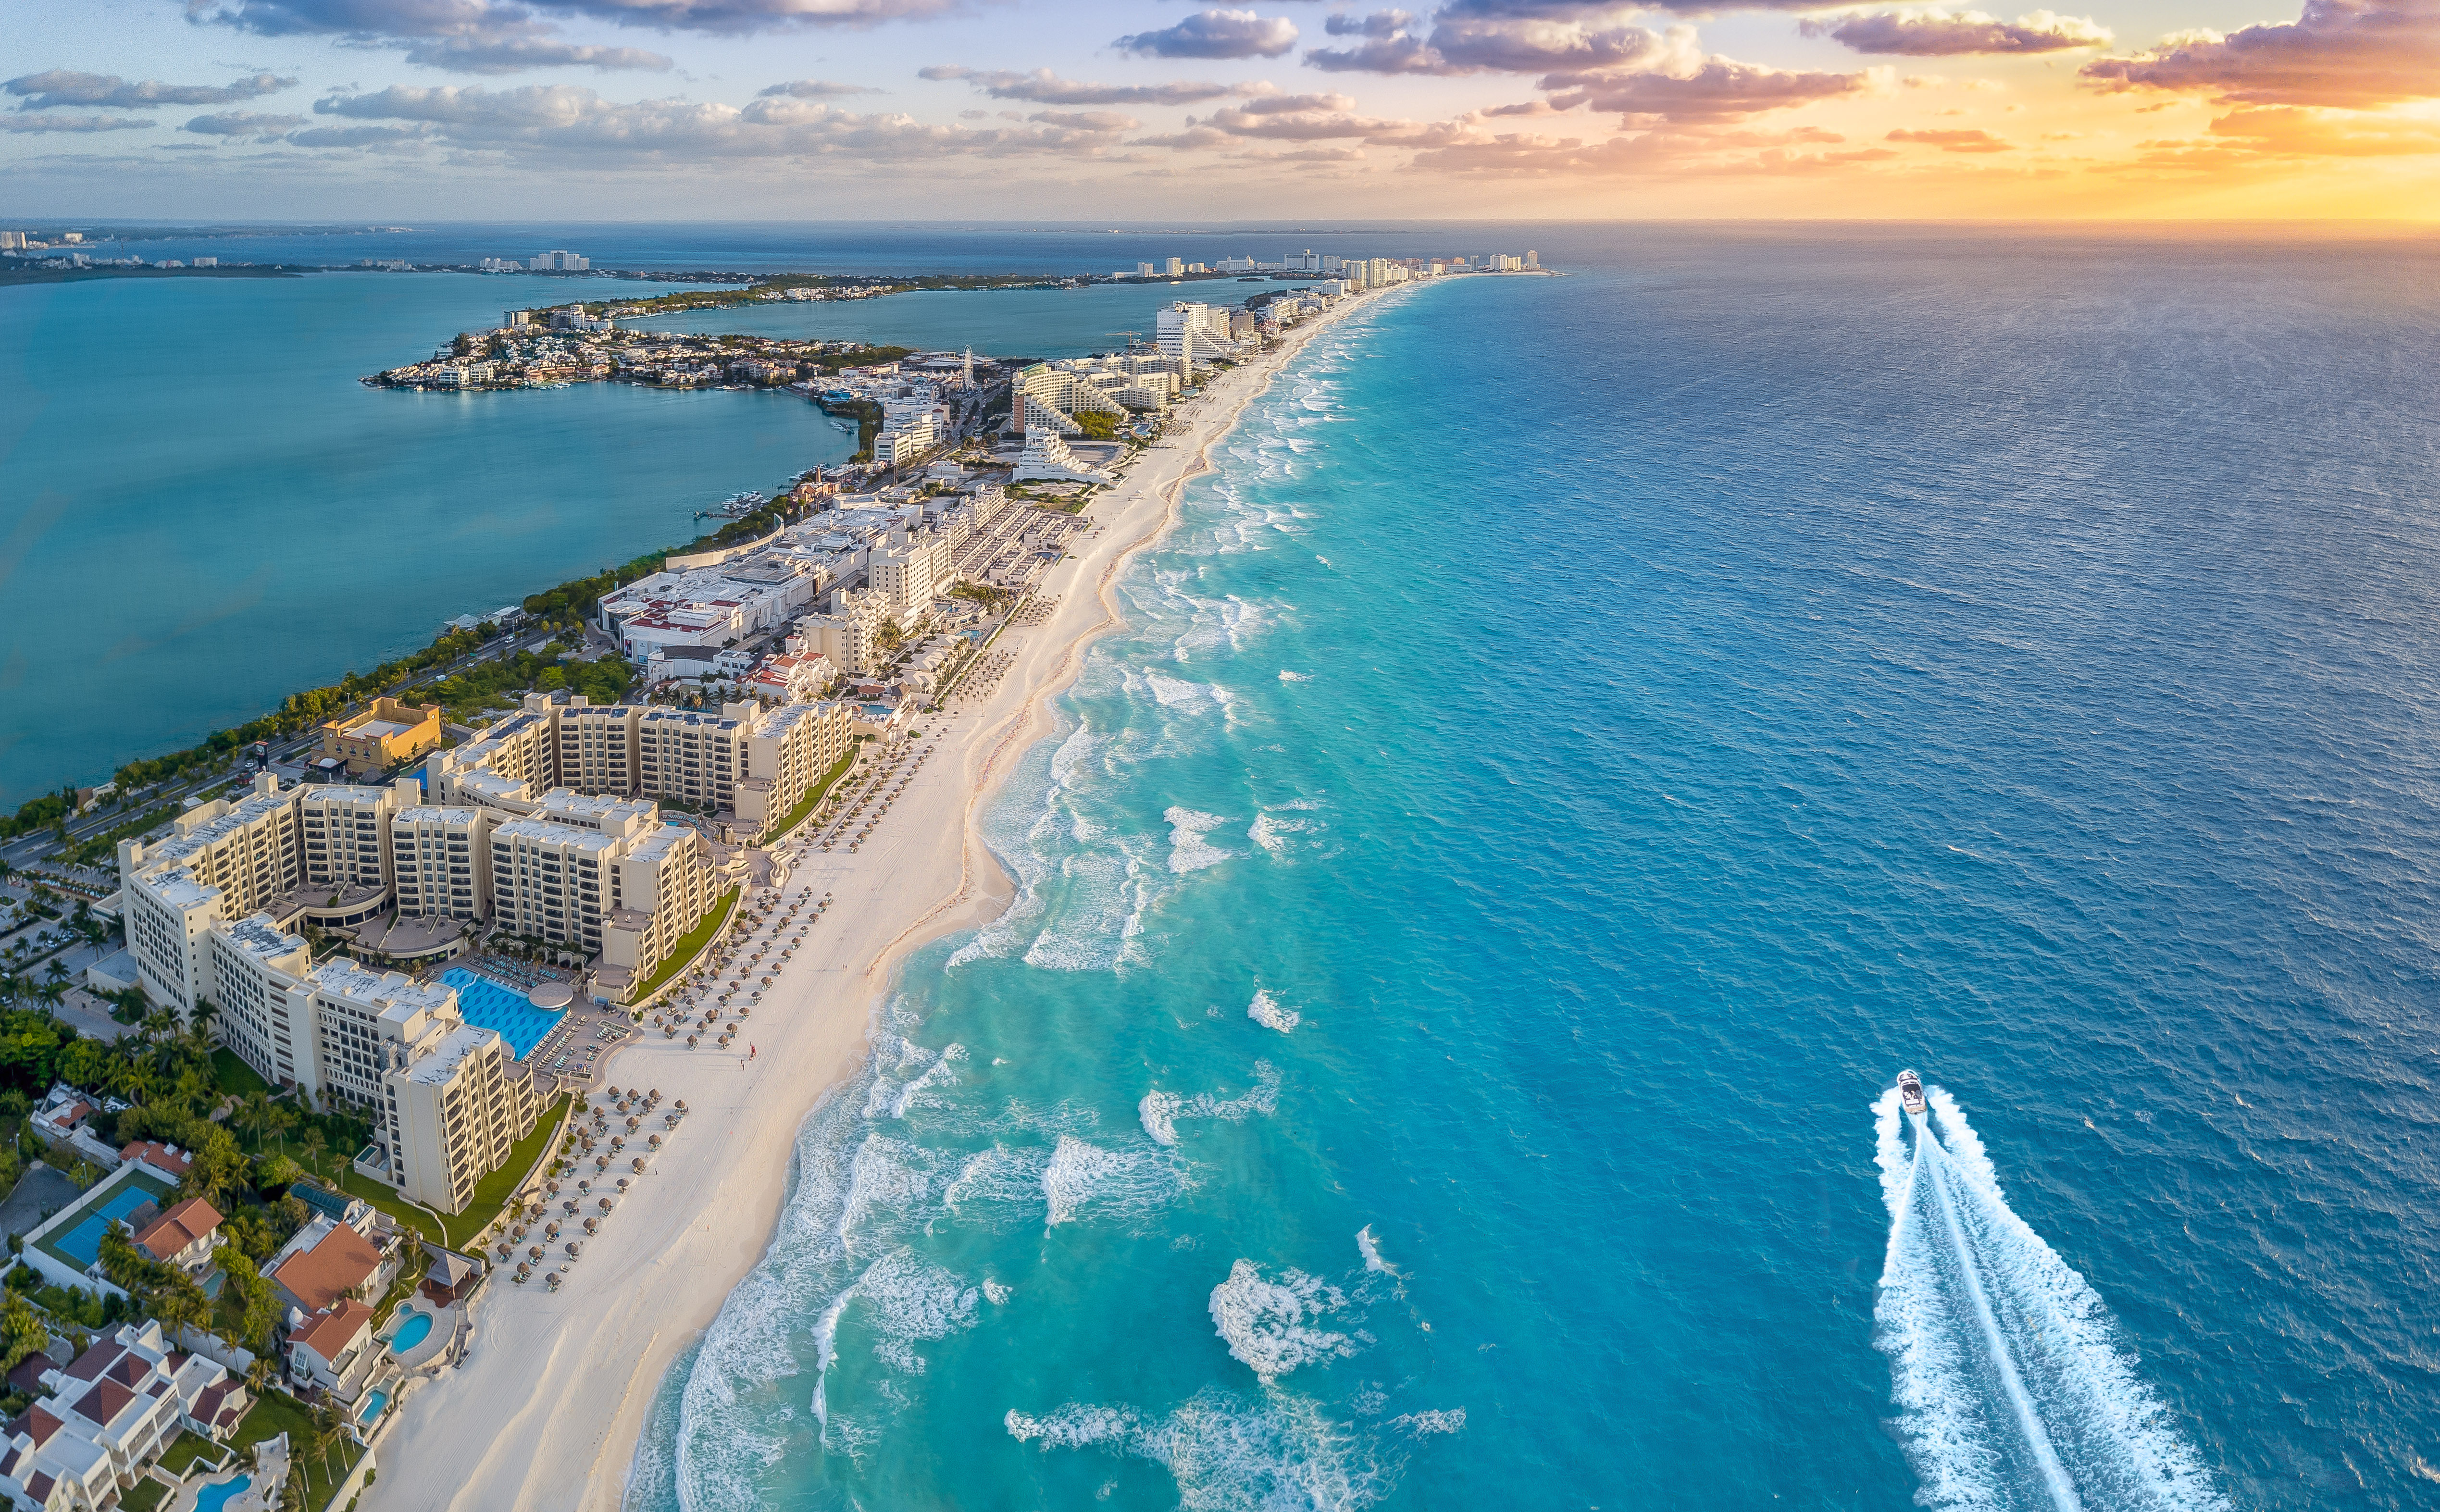 Aerial view of Cancun's coast